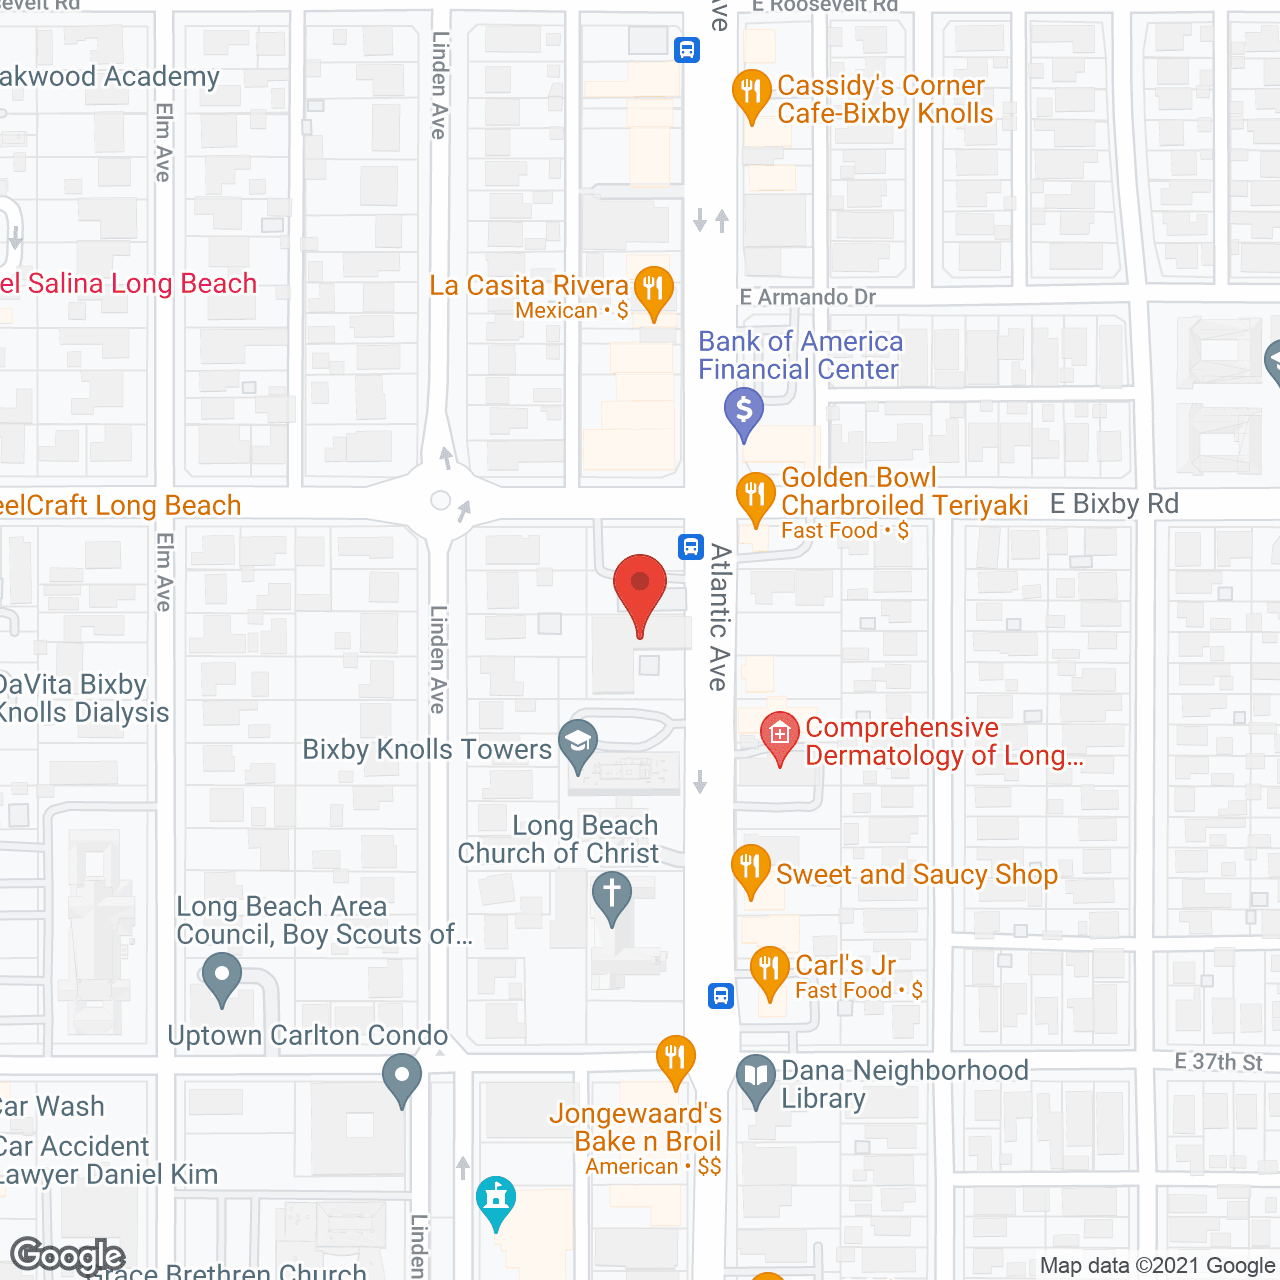 Bay Towers at Bixby Knolls in google map